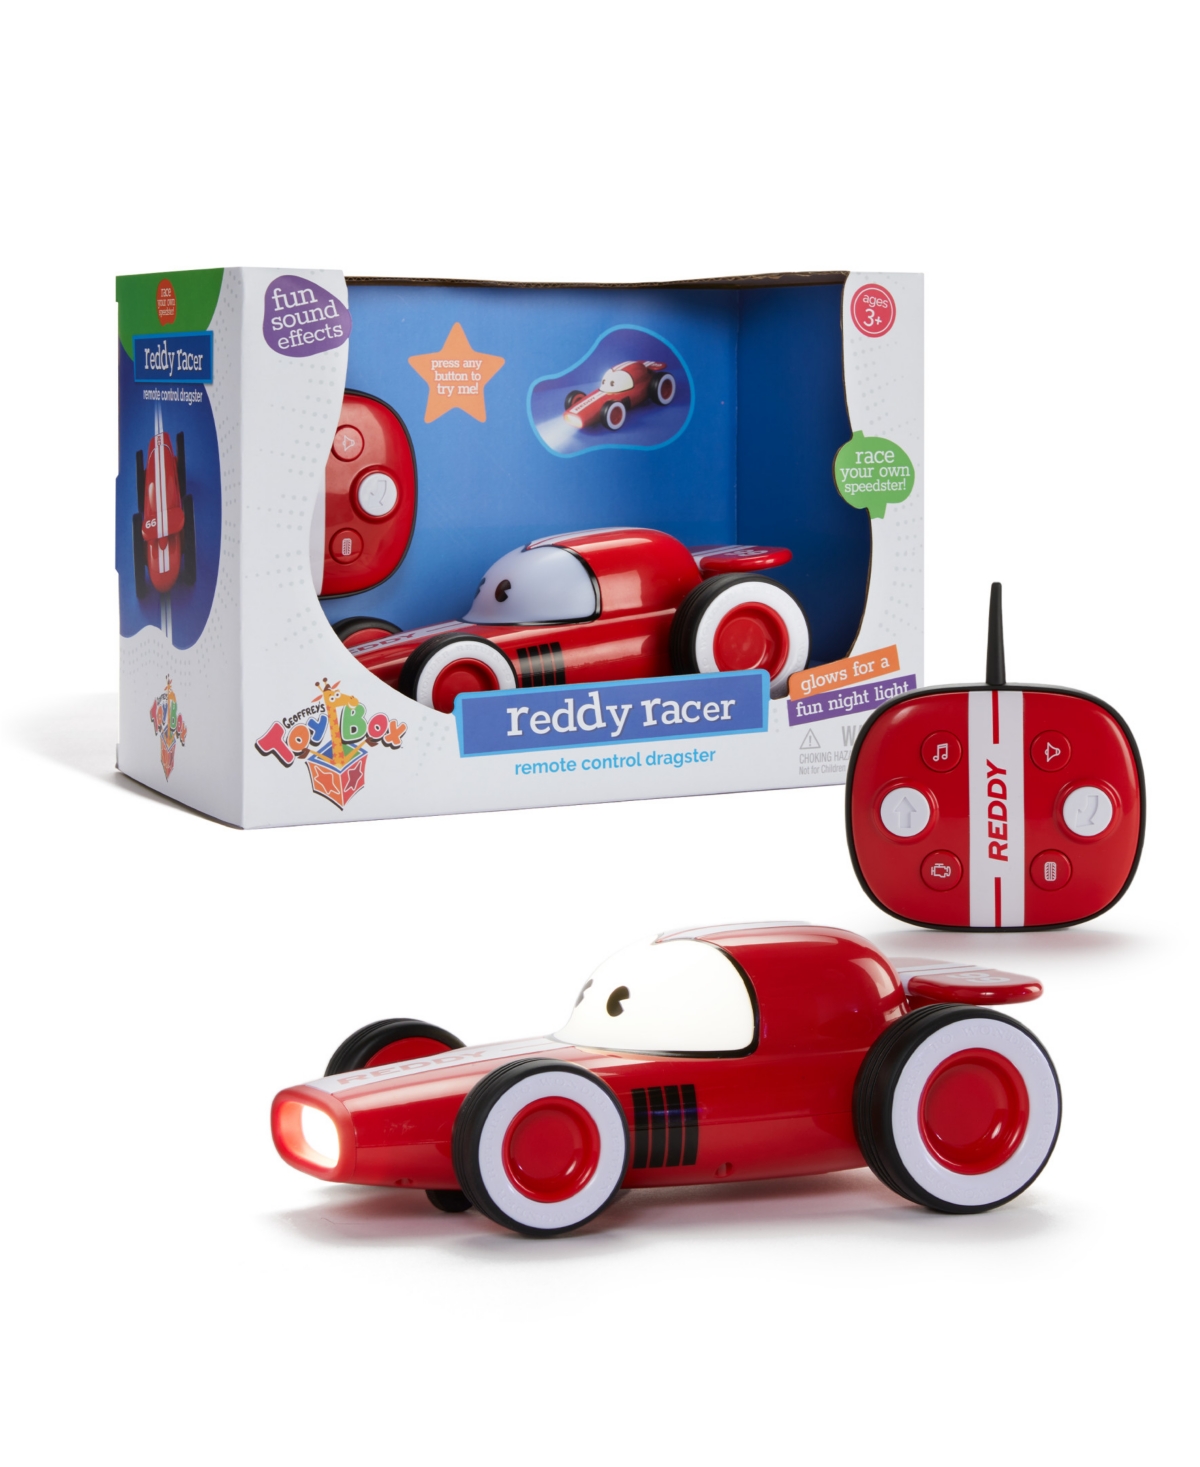 Geoffrey's Toy Box Kids' Toy Rc Dragster Reddy Racer Set, Created For Macy's